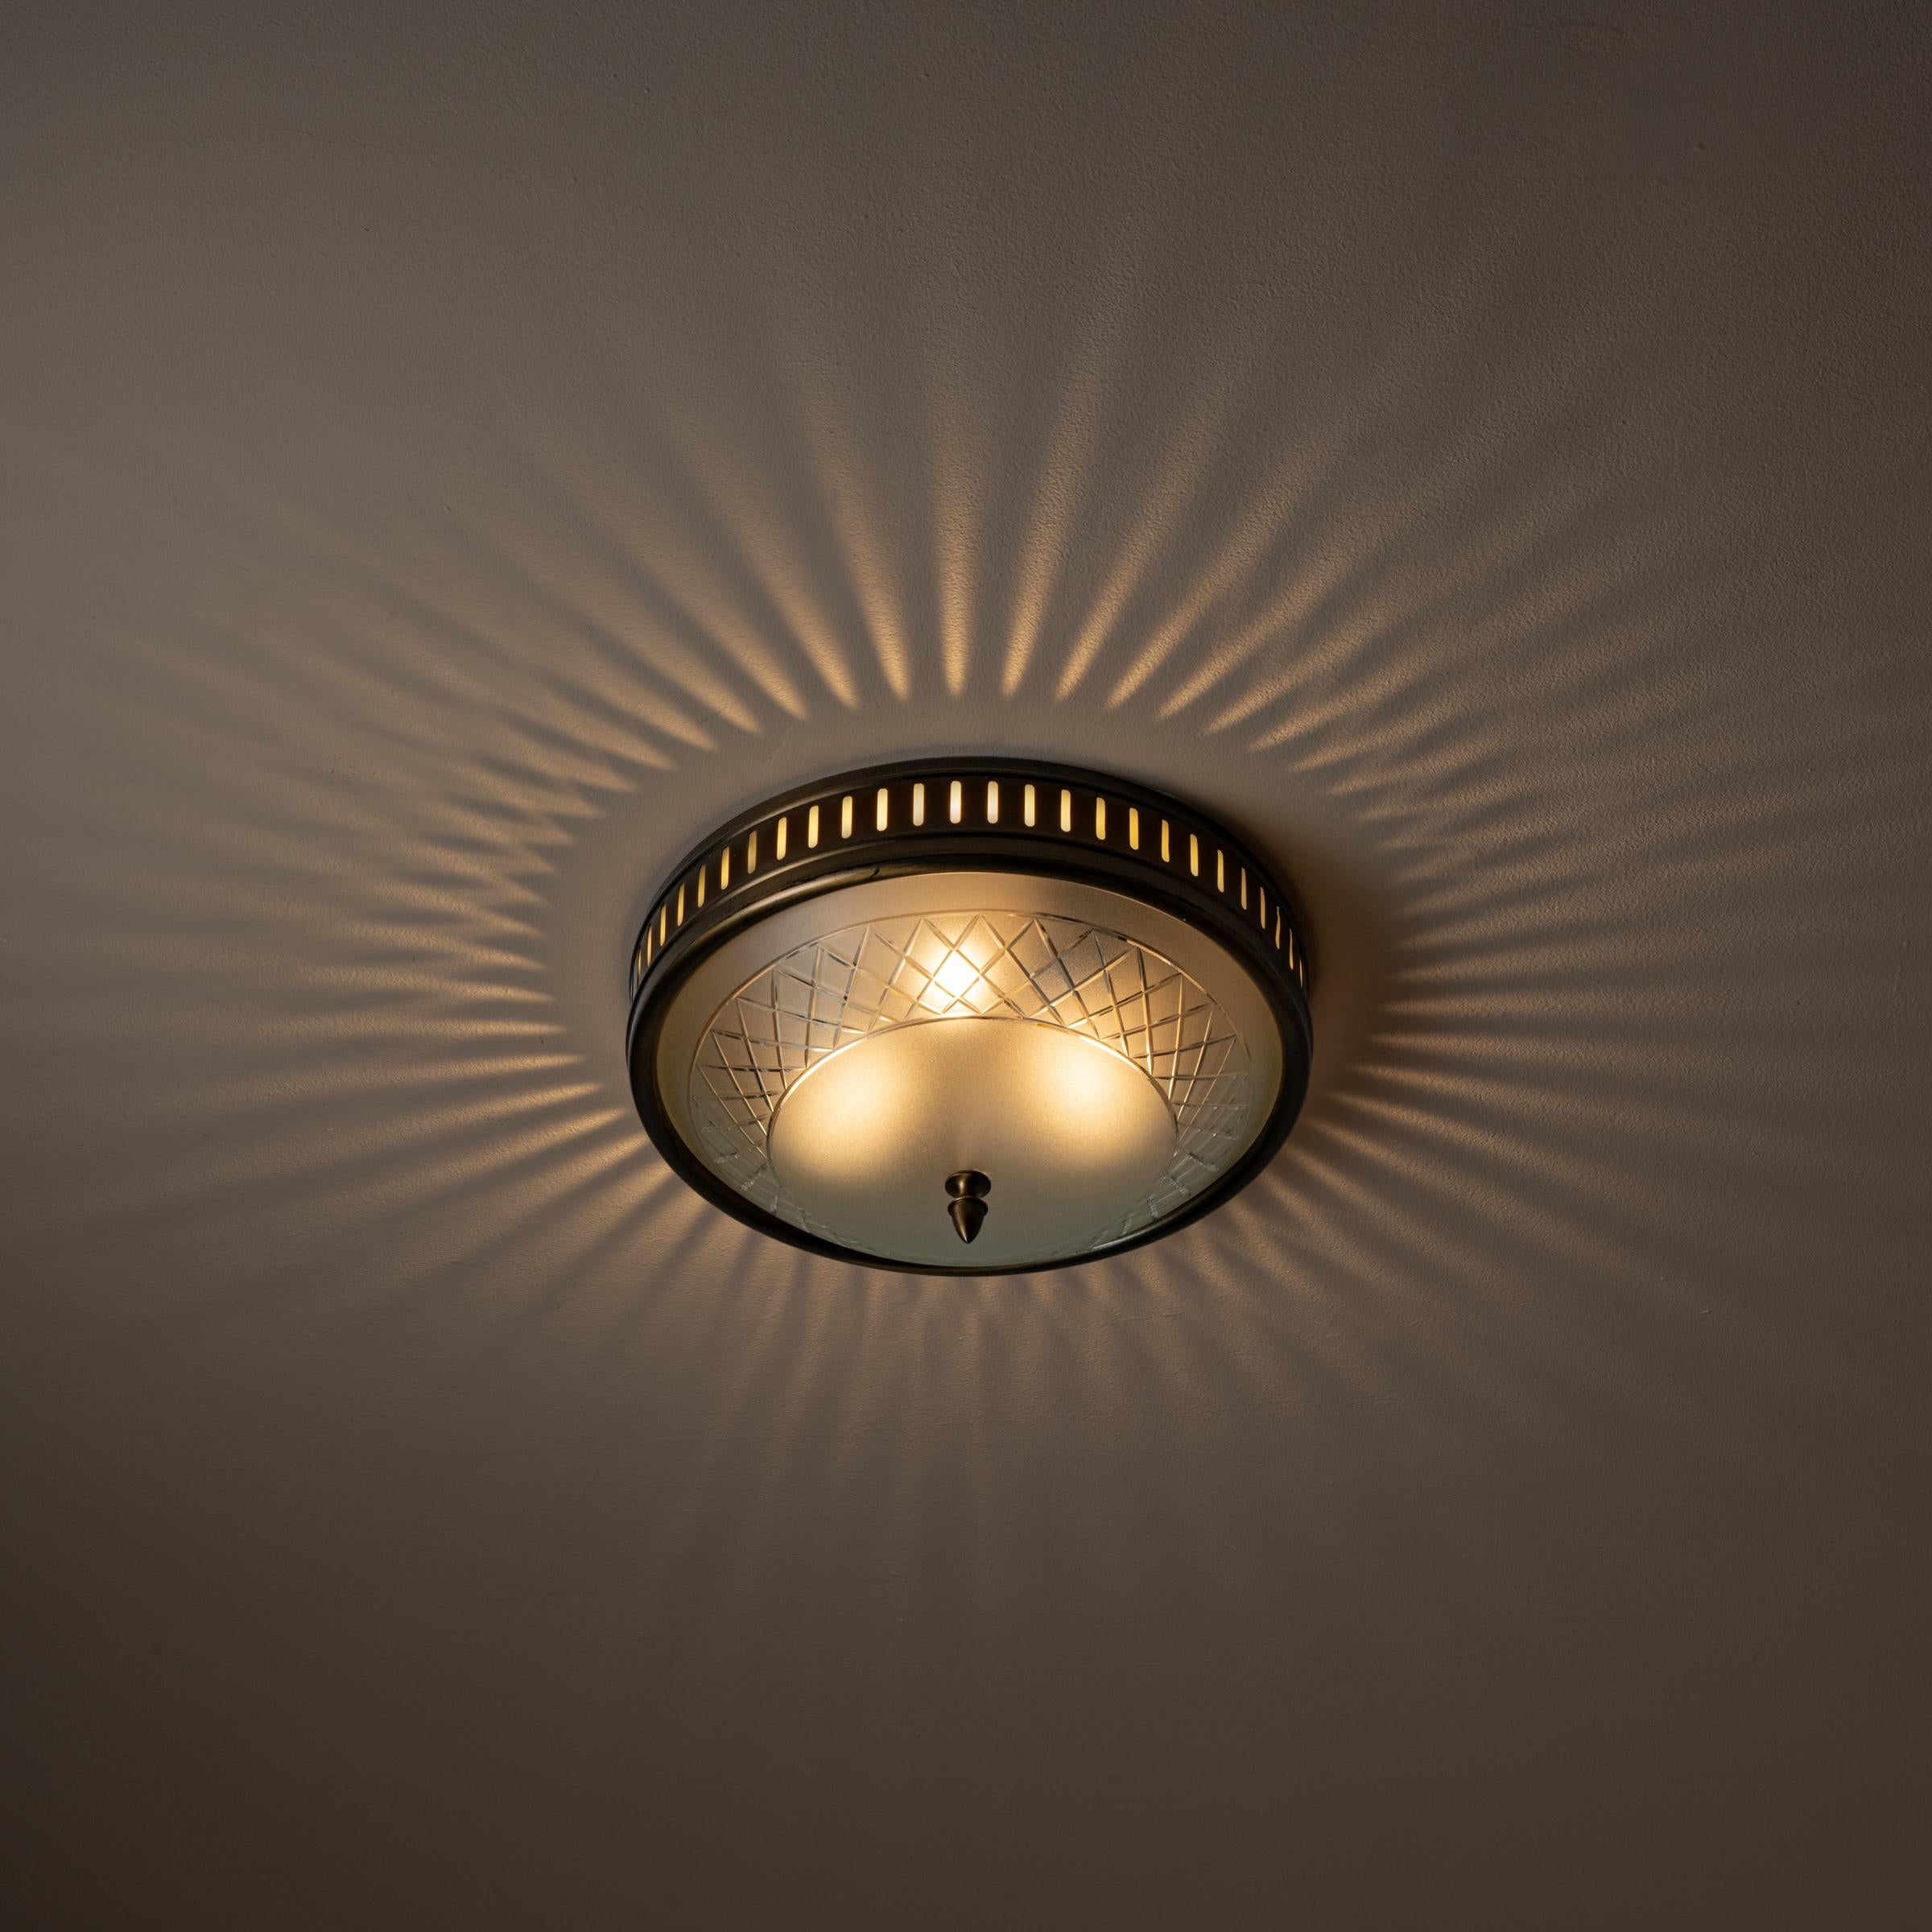 Nine flush mount ceiling lights by Arredoluce. Manufactured in Italy, circa 1940's. Engraved glass, brass, Rewired for U.S. standards. We recommend three E27 40w maximum bulbs per fixture. Bulbs not included. There are 8 available even though image